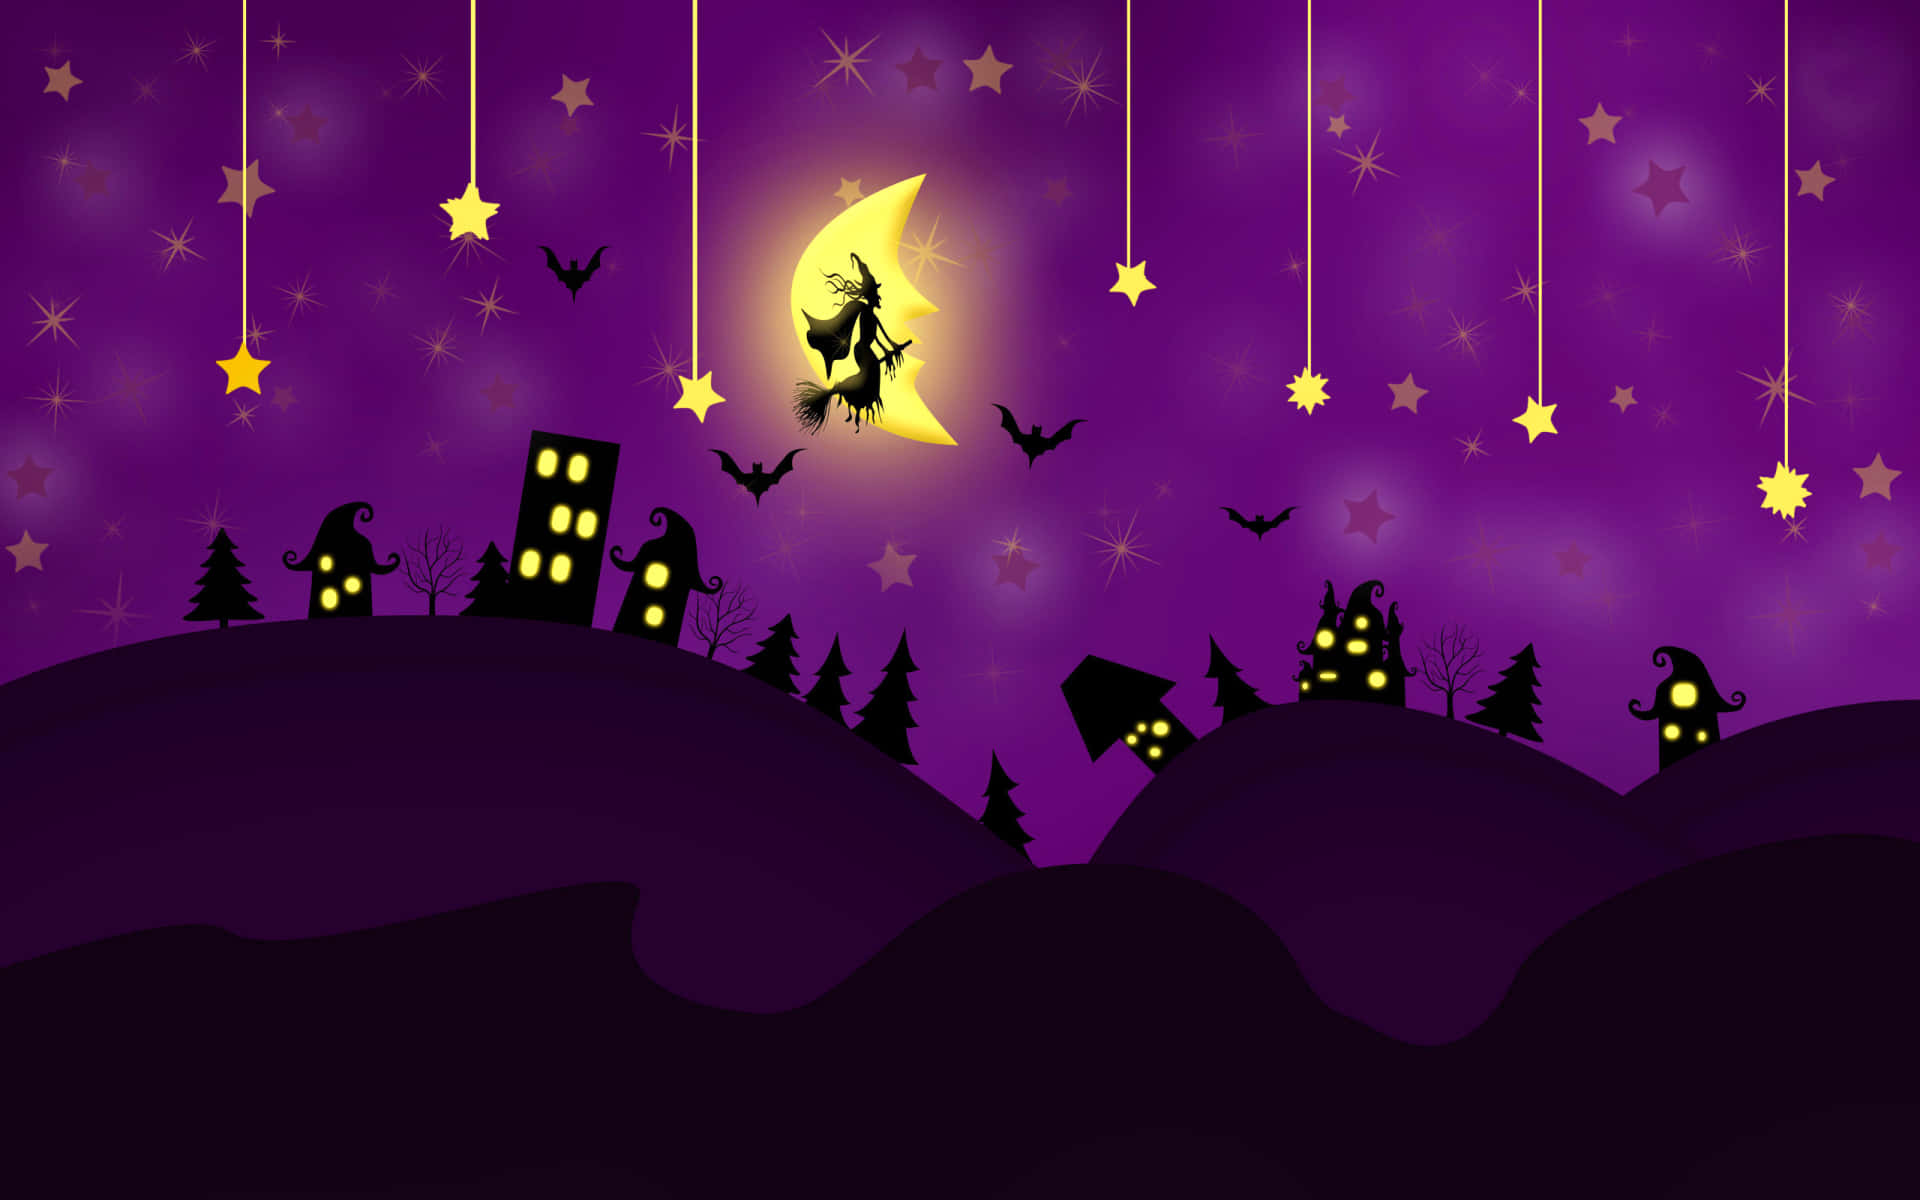 Get Spooked this Halloween Wallpaper